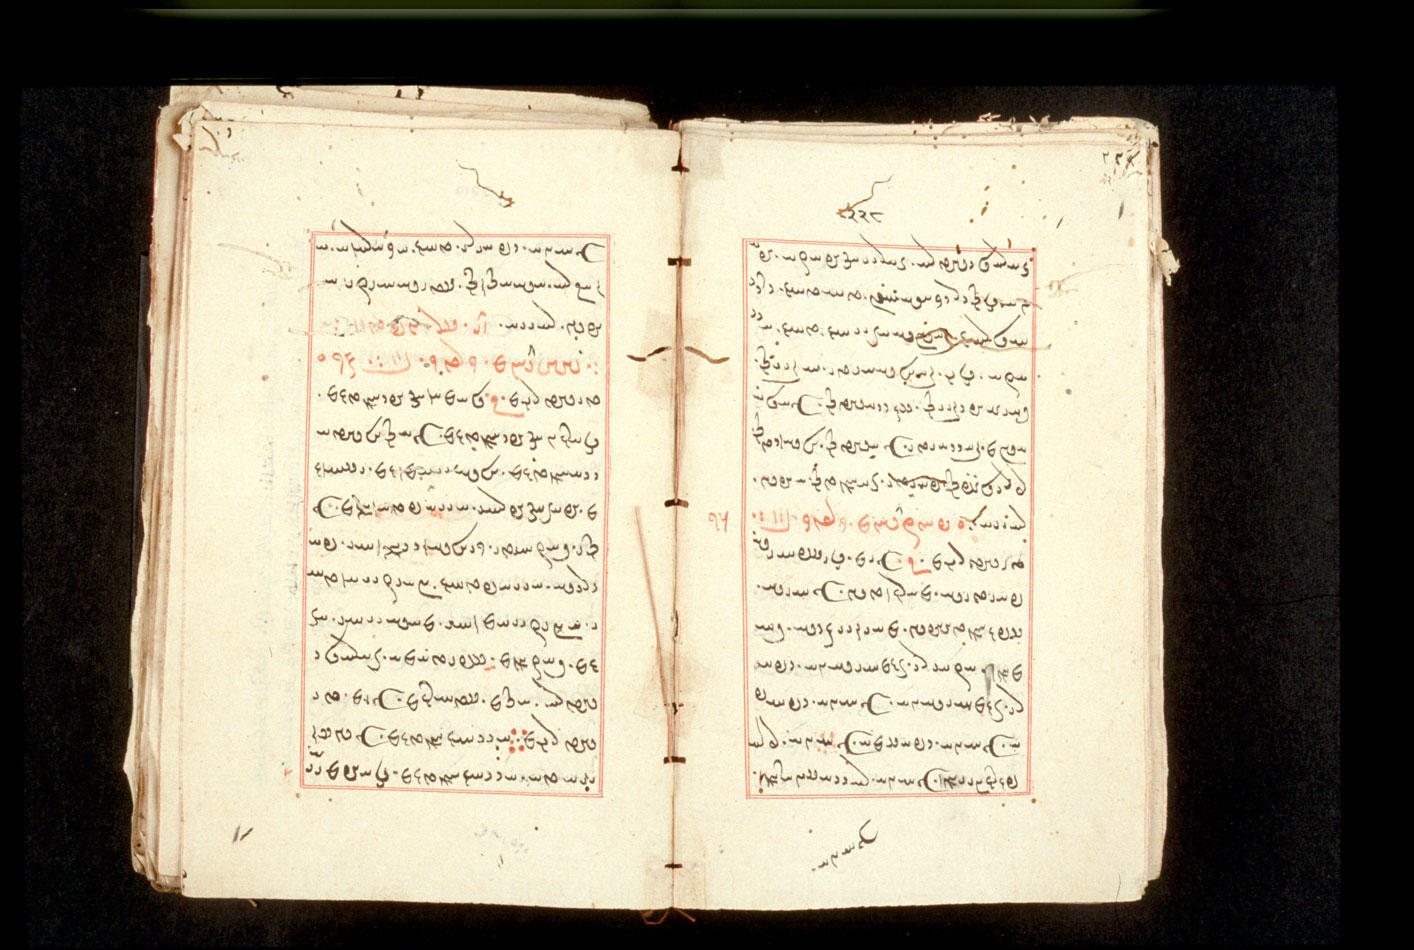 Folios 228v (right) and 229r (left)